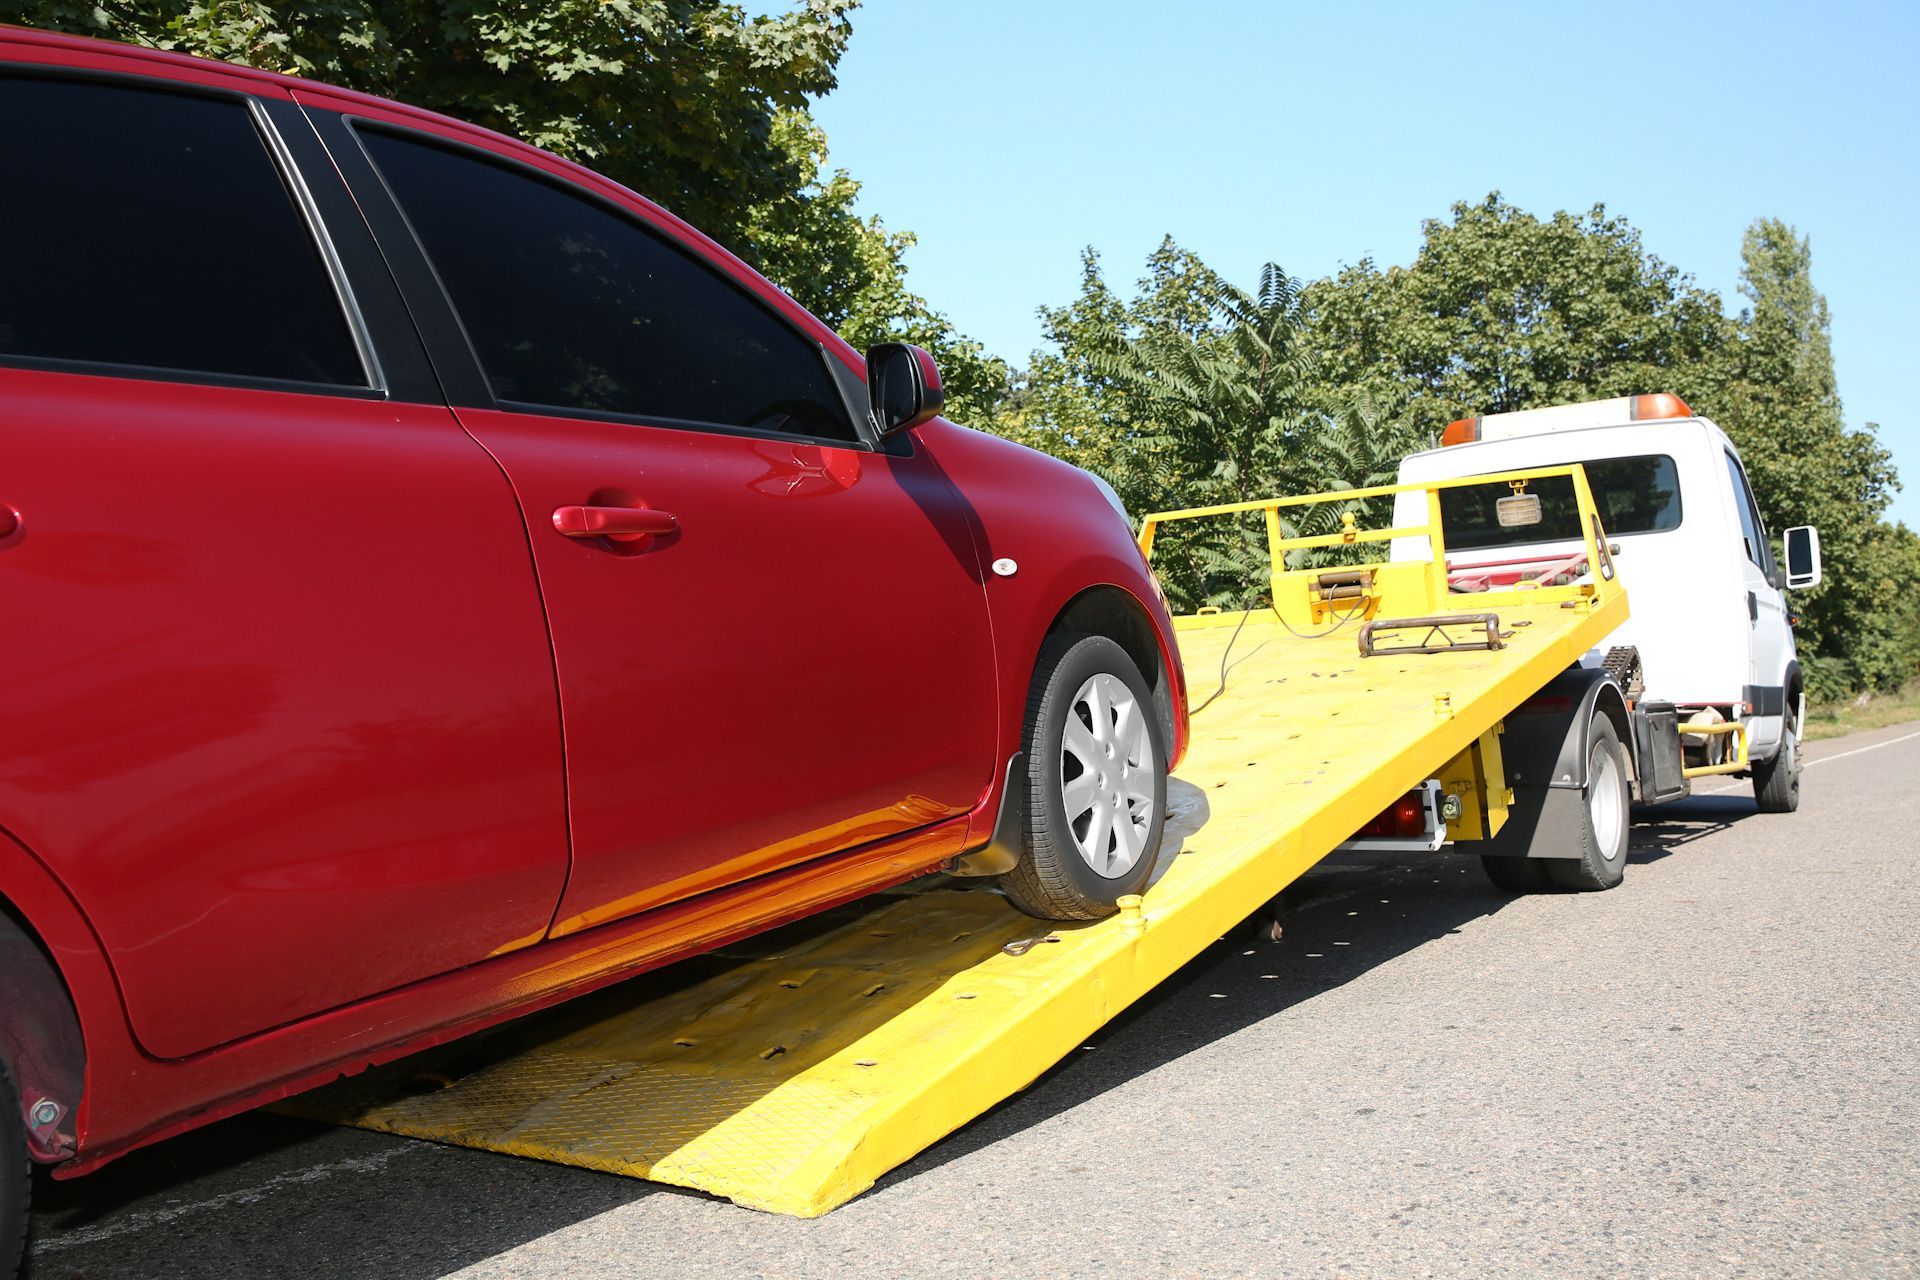 A red car is being towed by a tow truck.